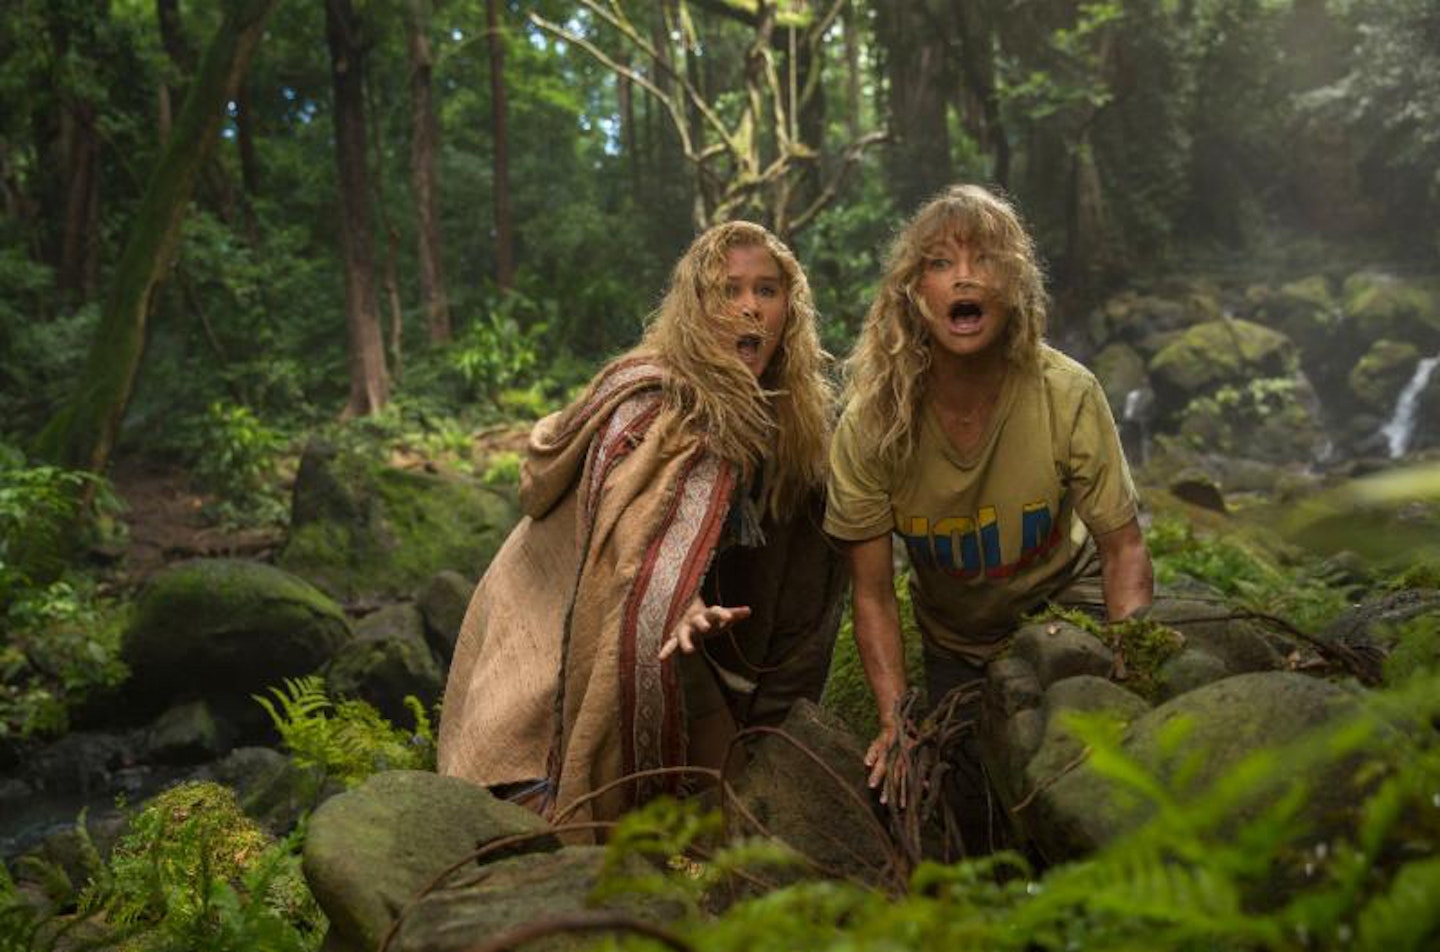 Amy Schumer and Goldie Hawn in Snatched